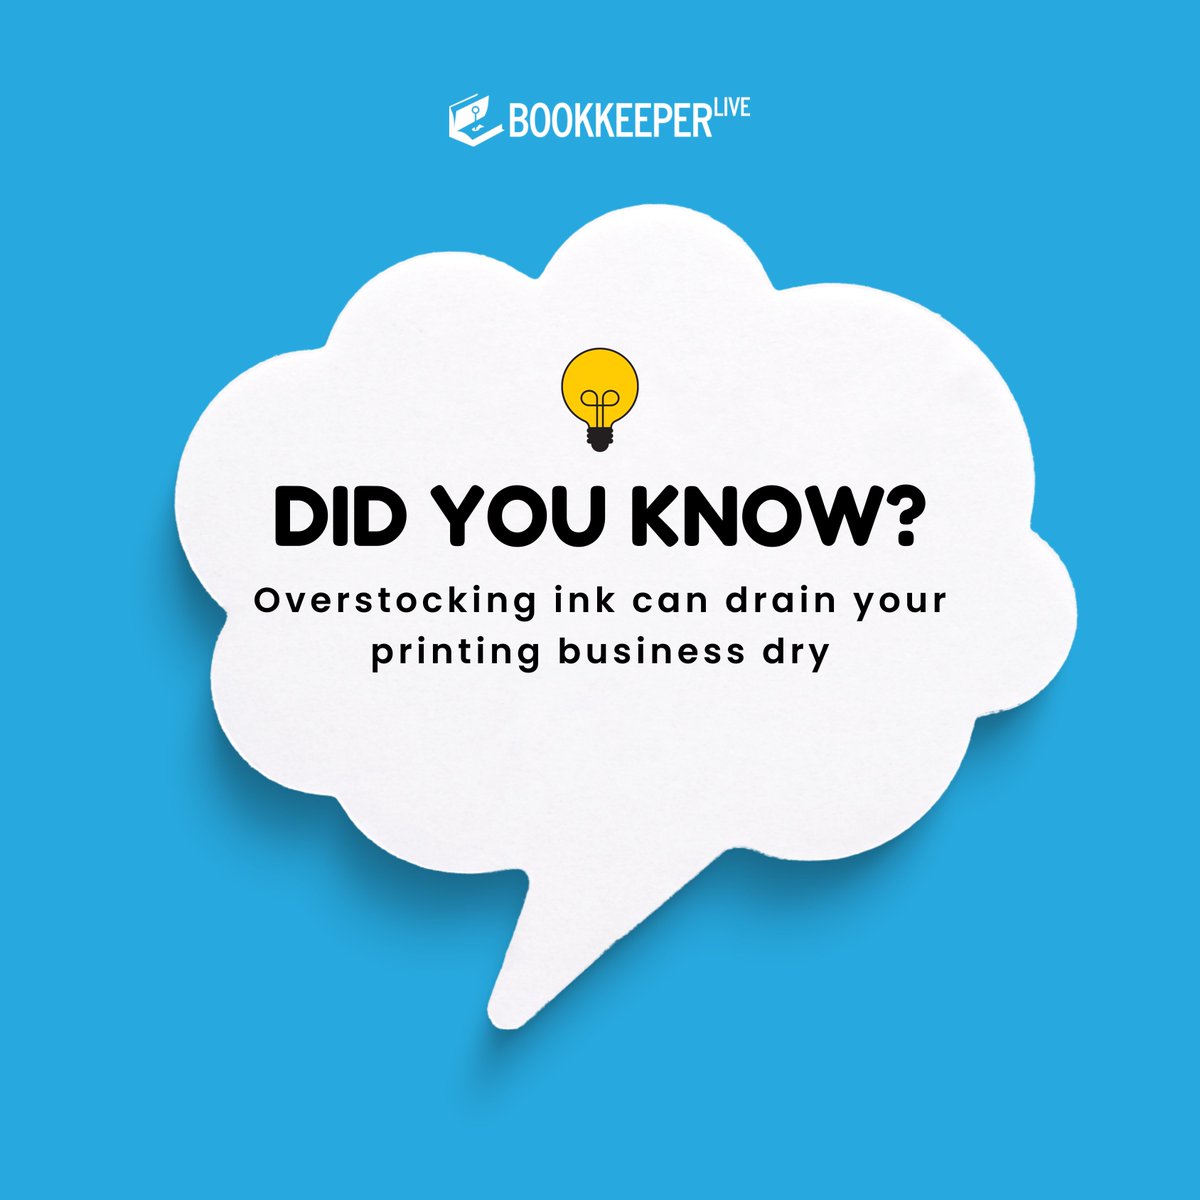 #DidYouKnow that holding onto excess inventory can be a major drain on your #printing business's profits?

To know more visit  - shorturl.at/djUX1

Follow - @bookkeeper_live 

#DidYouKnow #inventorymanagement #printingindustry #finance #usatax #bookkeeperlive #USA